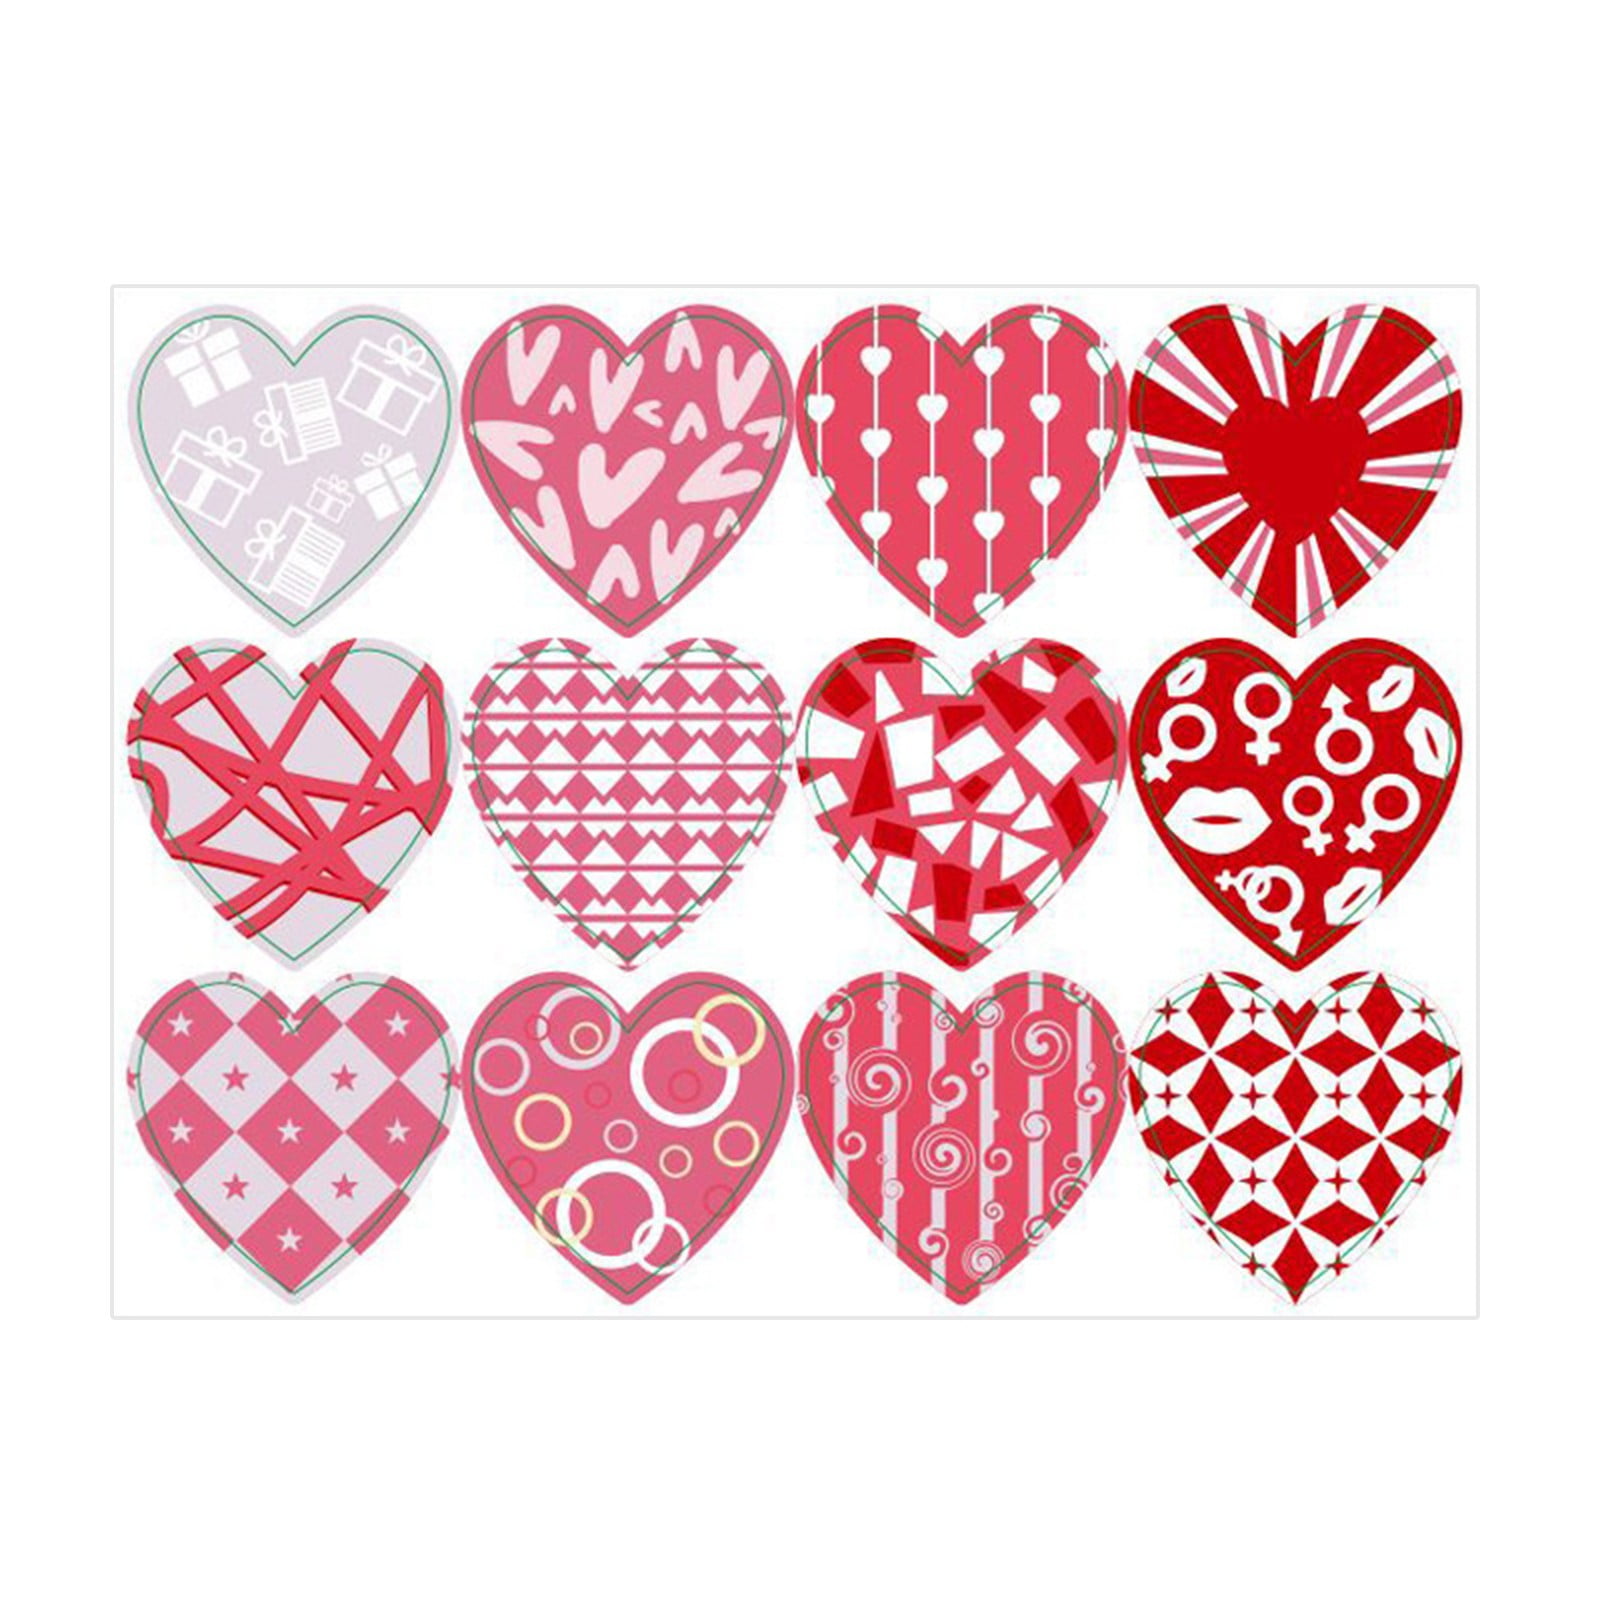 s Day Heart Stickers, Stickers ,Heart Labels for Anniversaries Weddih